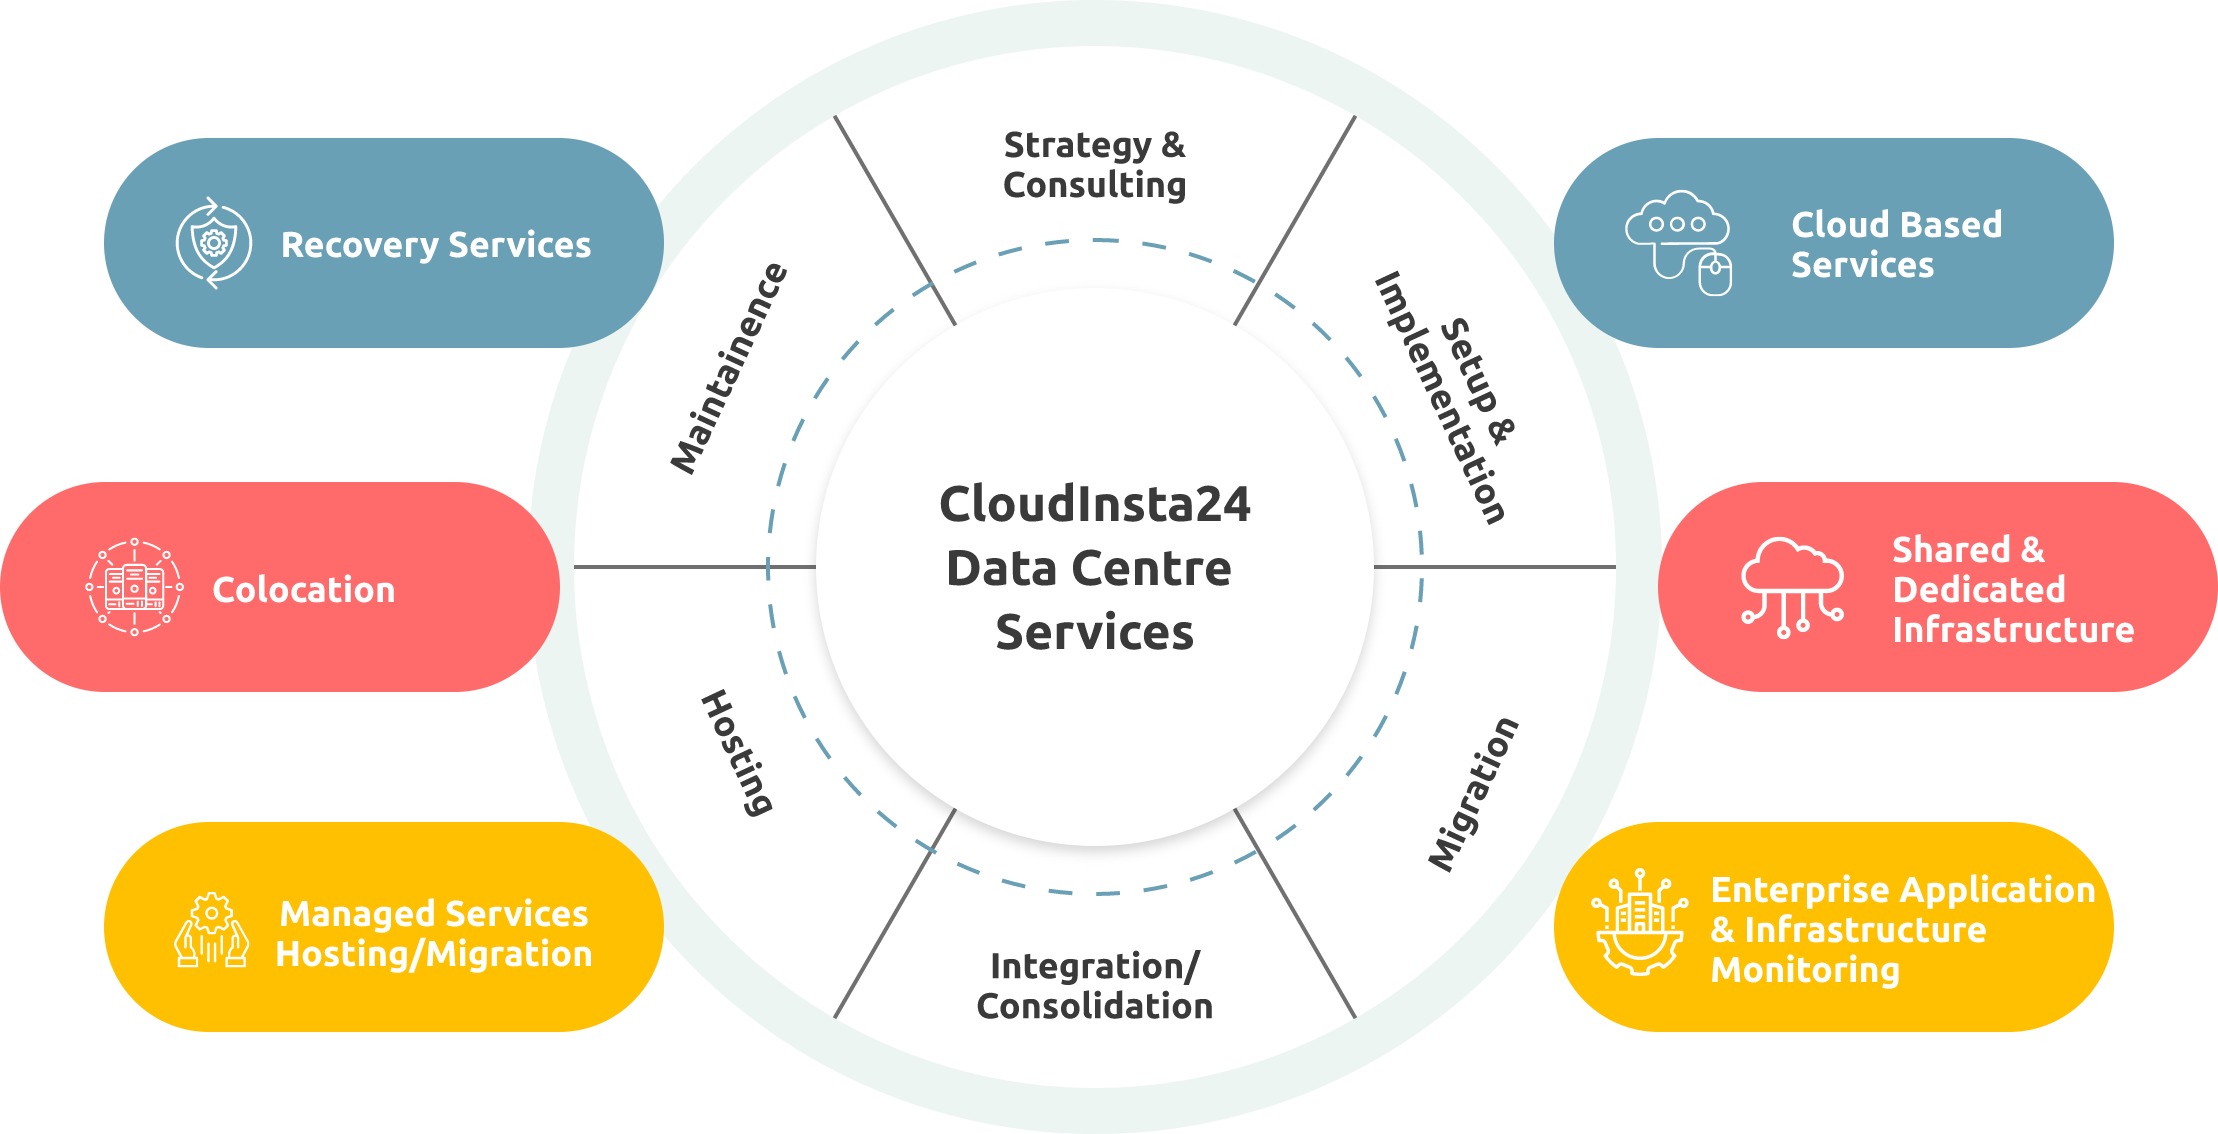 CloudInsta24 Data Centre Services illustrated: Comprehensive data center services for secure, reliable, and scalable technology infrastructure.